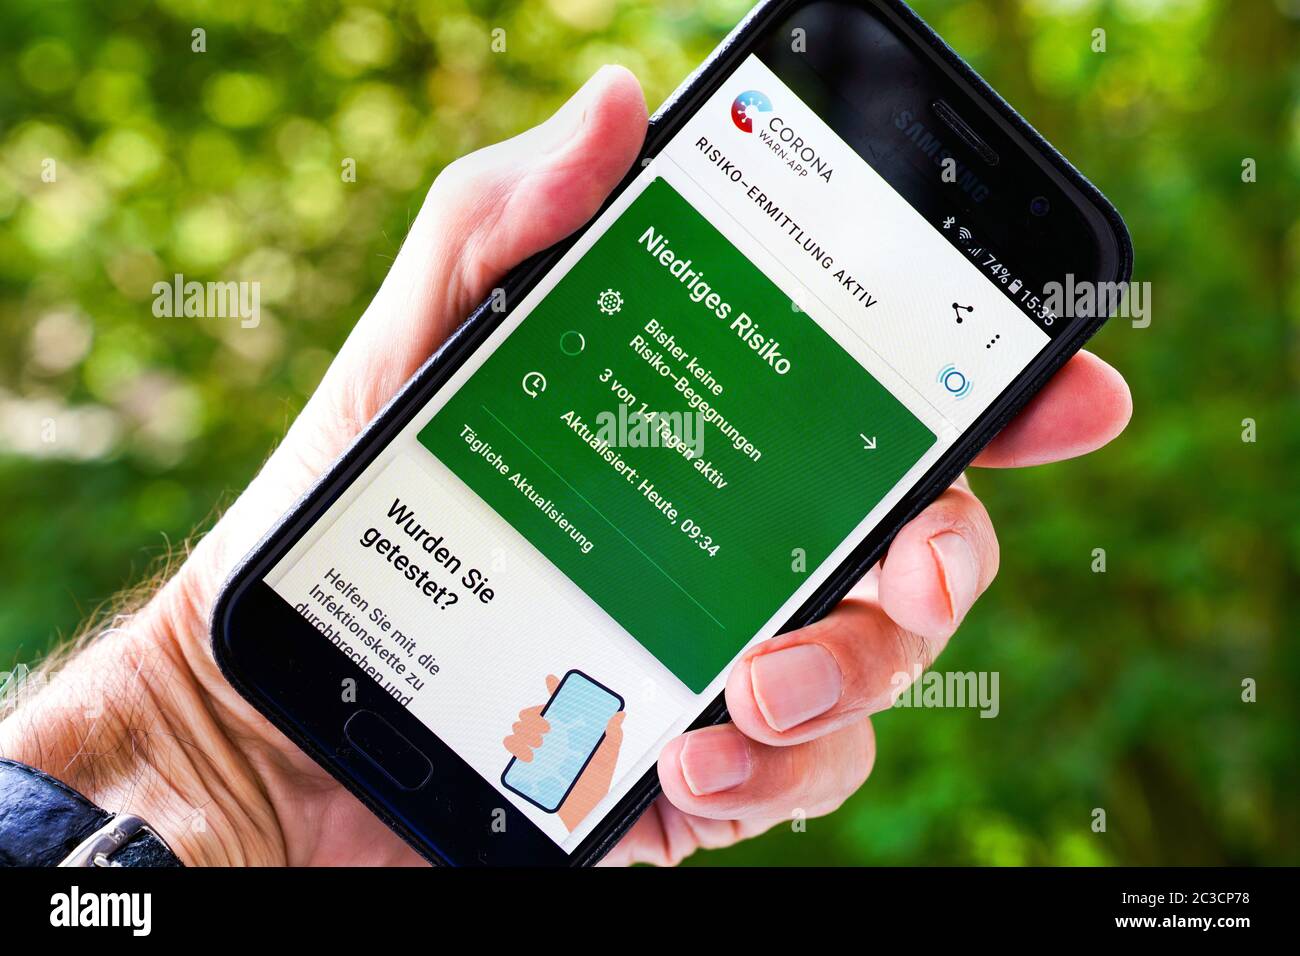 App Download High Resolution Stock Photography and Images - Alamy